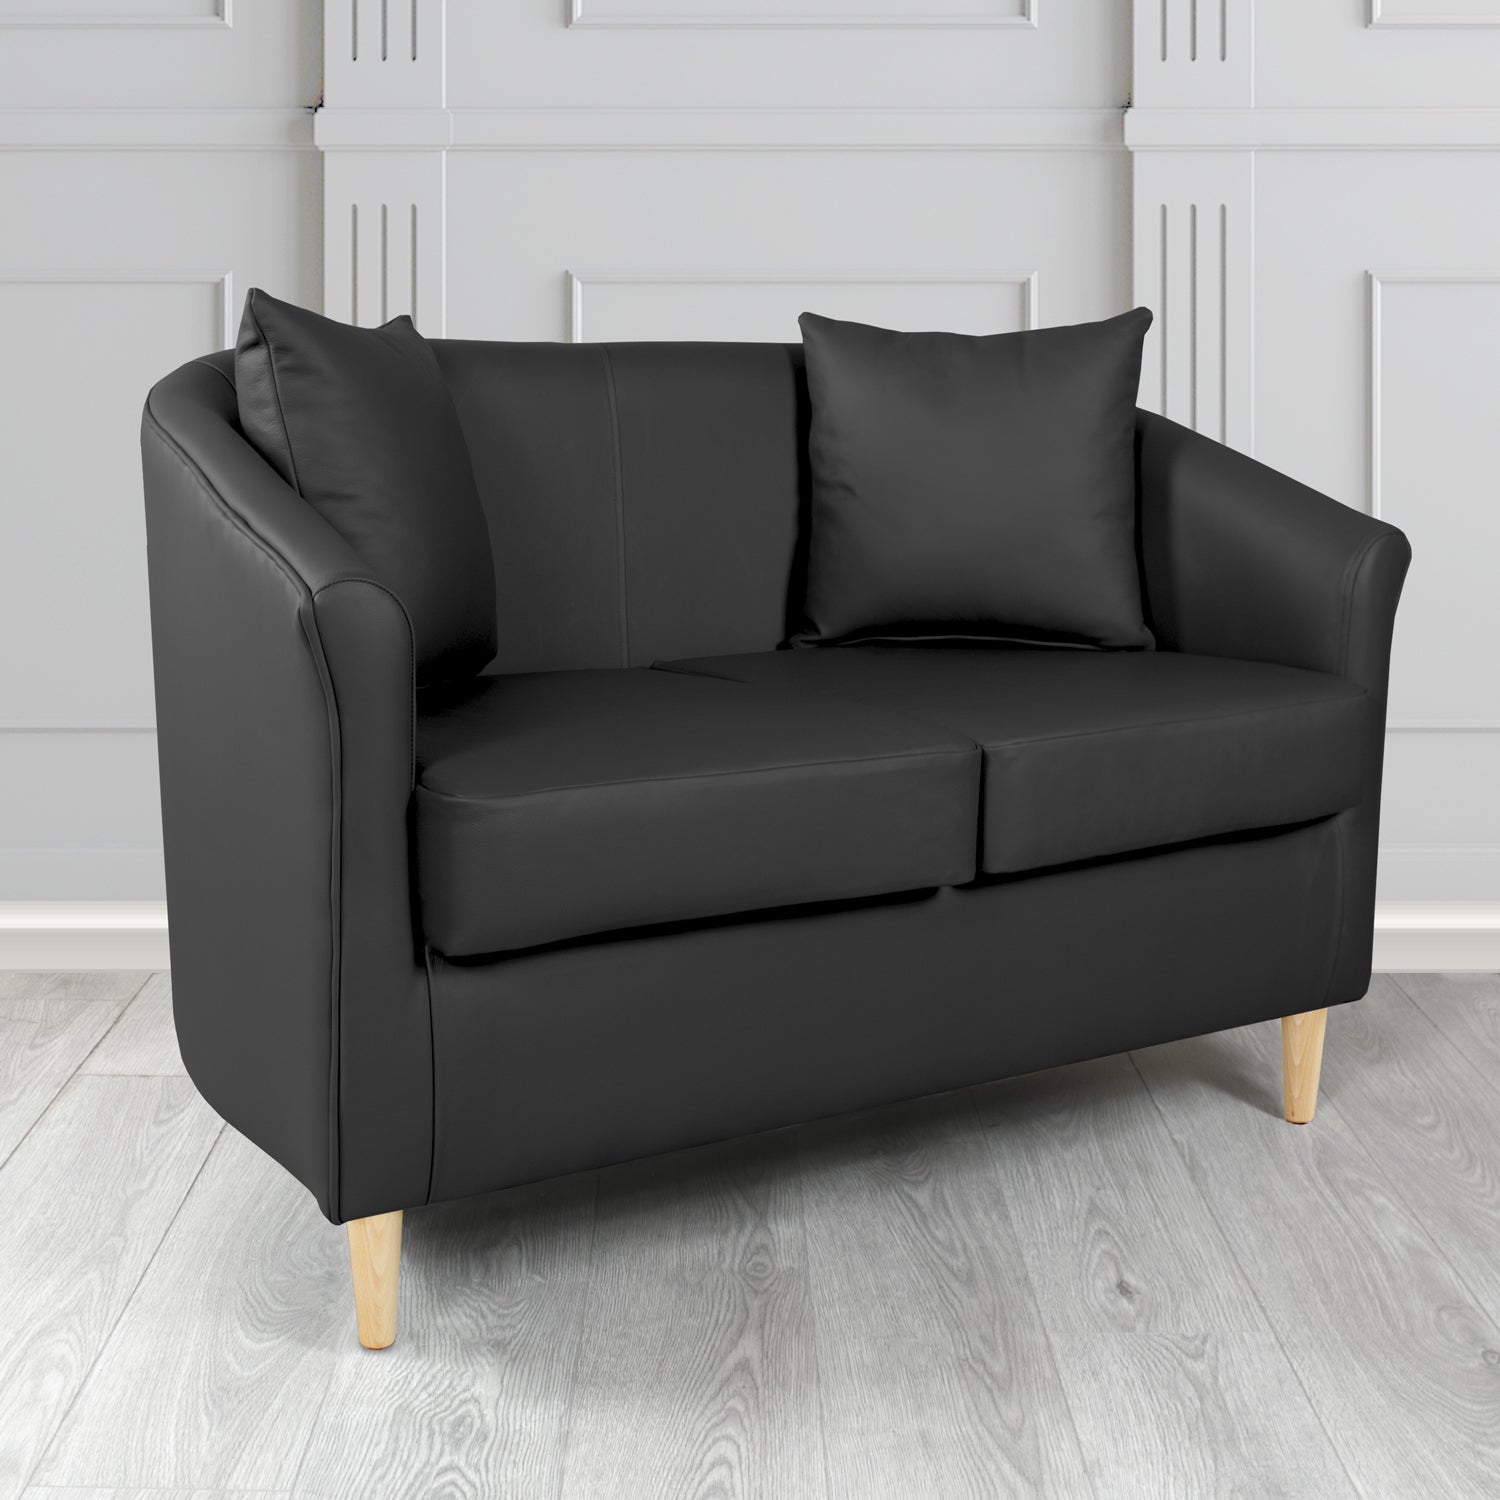 St Tropez 2 Seater Tub Sofa in Madrid Black Faux Leather - The Tub Chair Shop